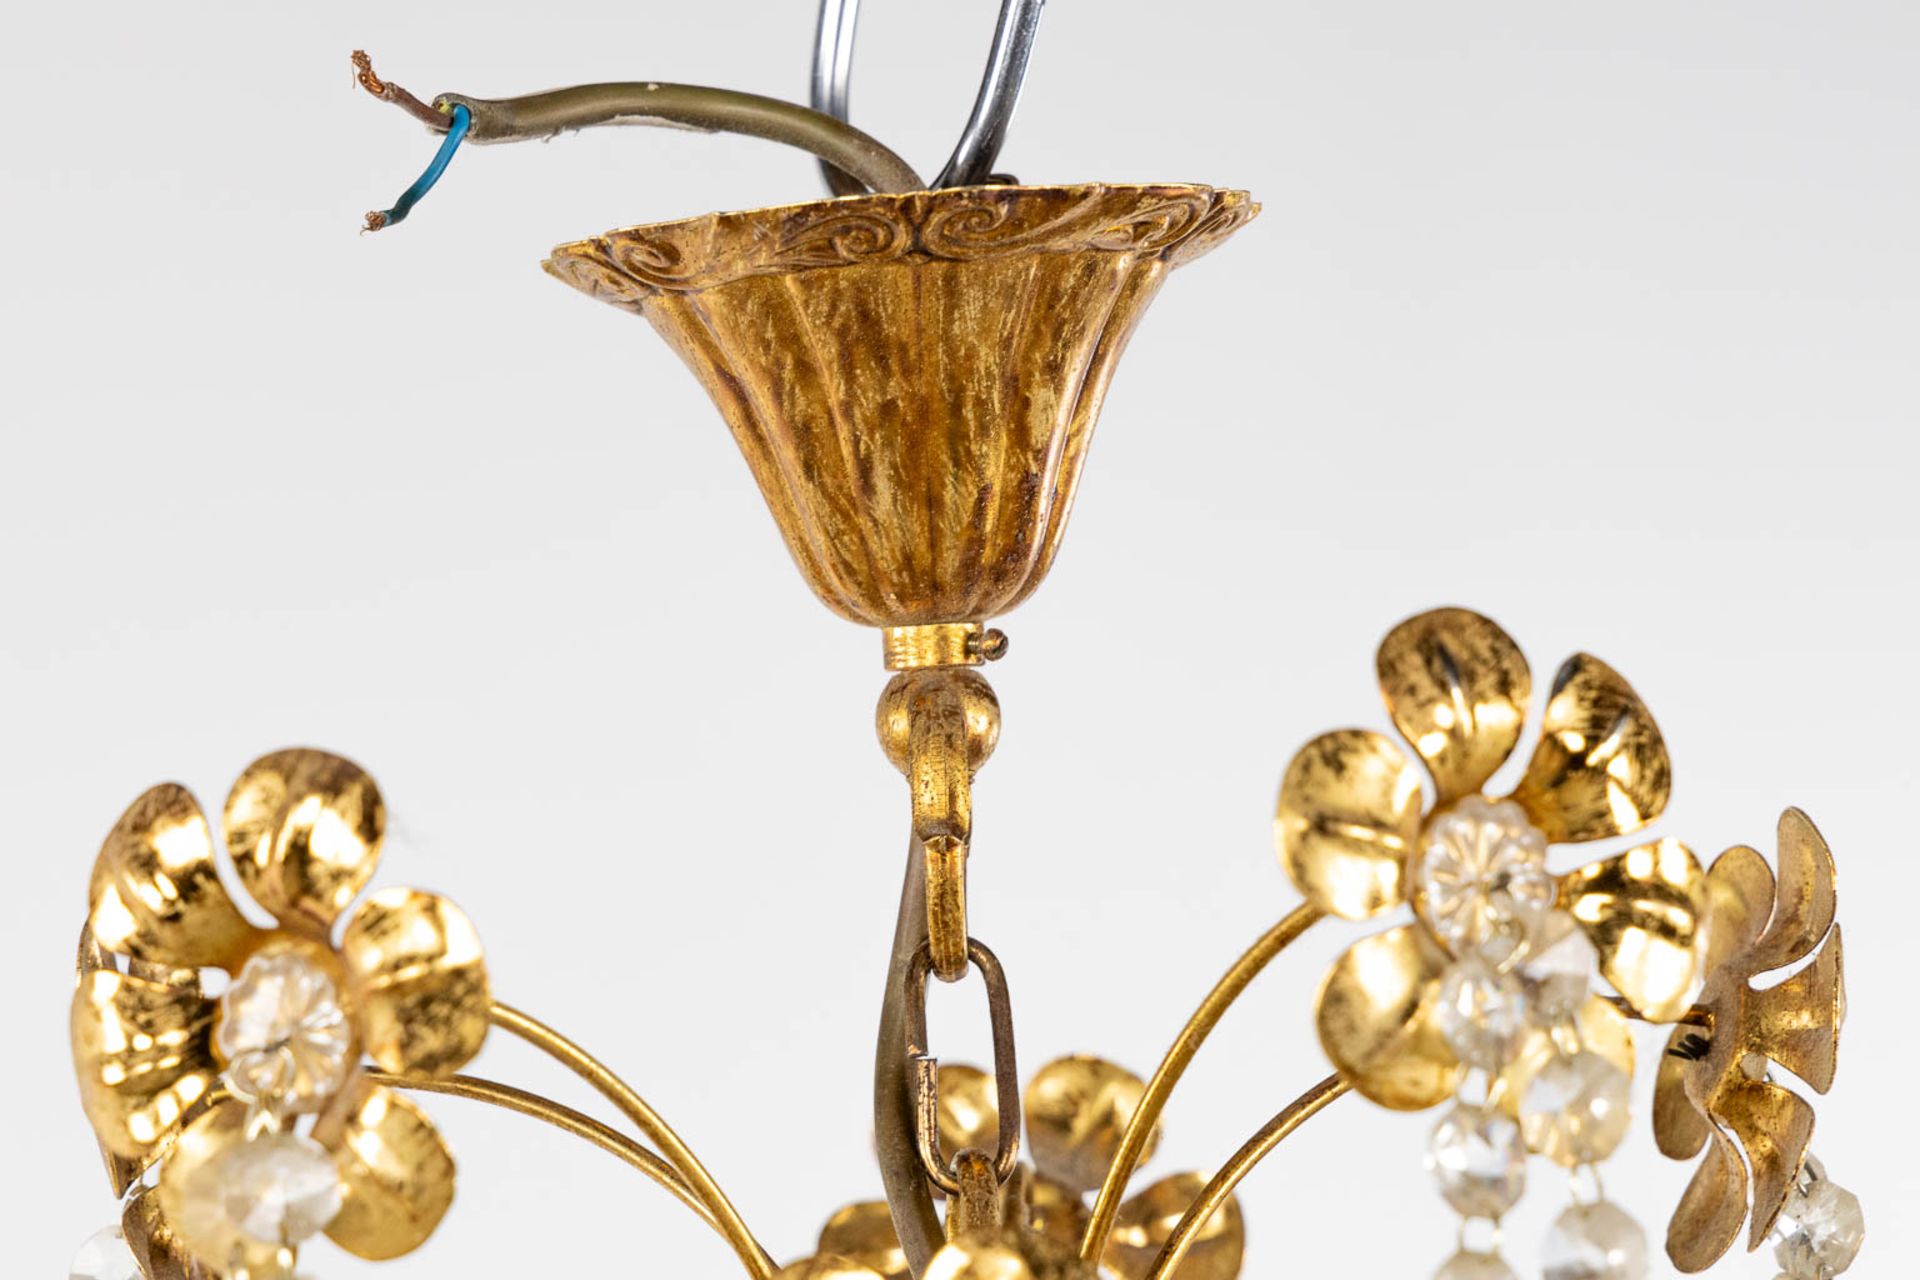 A decorative, floral hall lamp. Brass mounted with glass. 20th C. (H:74 x D:43 cm) - Image 3 of 11